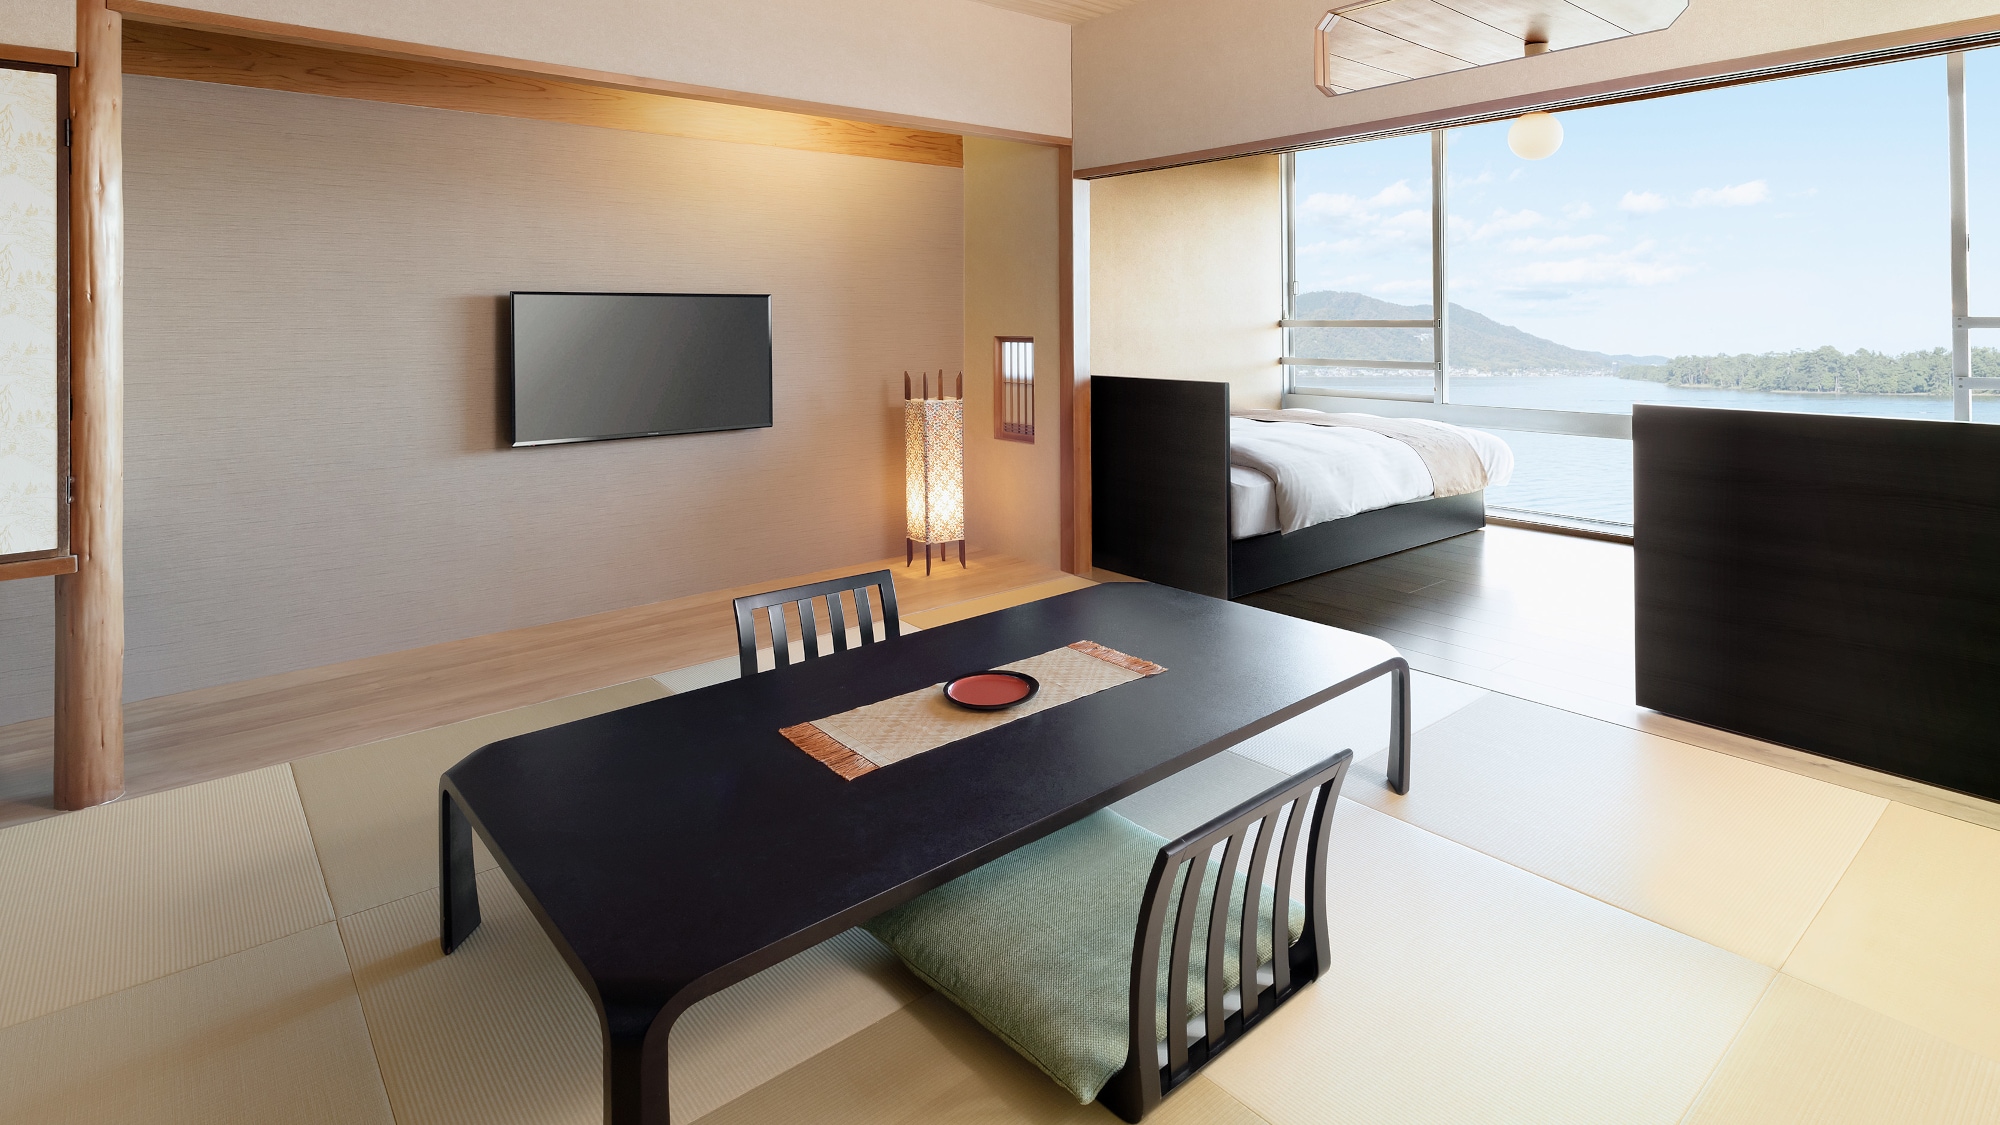 An example of a modern Japanese room (Japanese-style room + twin bed)